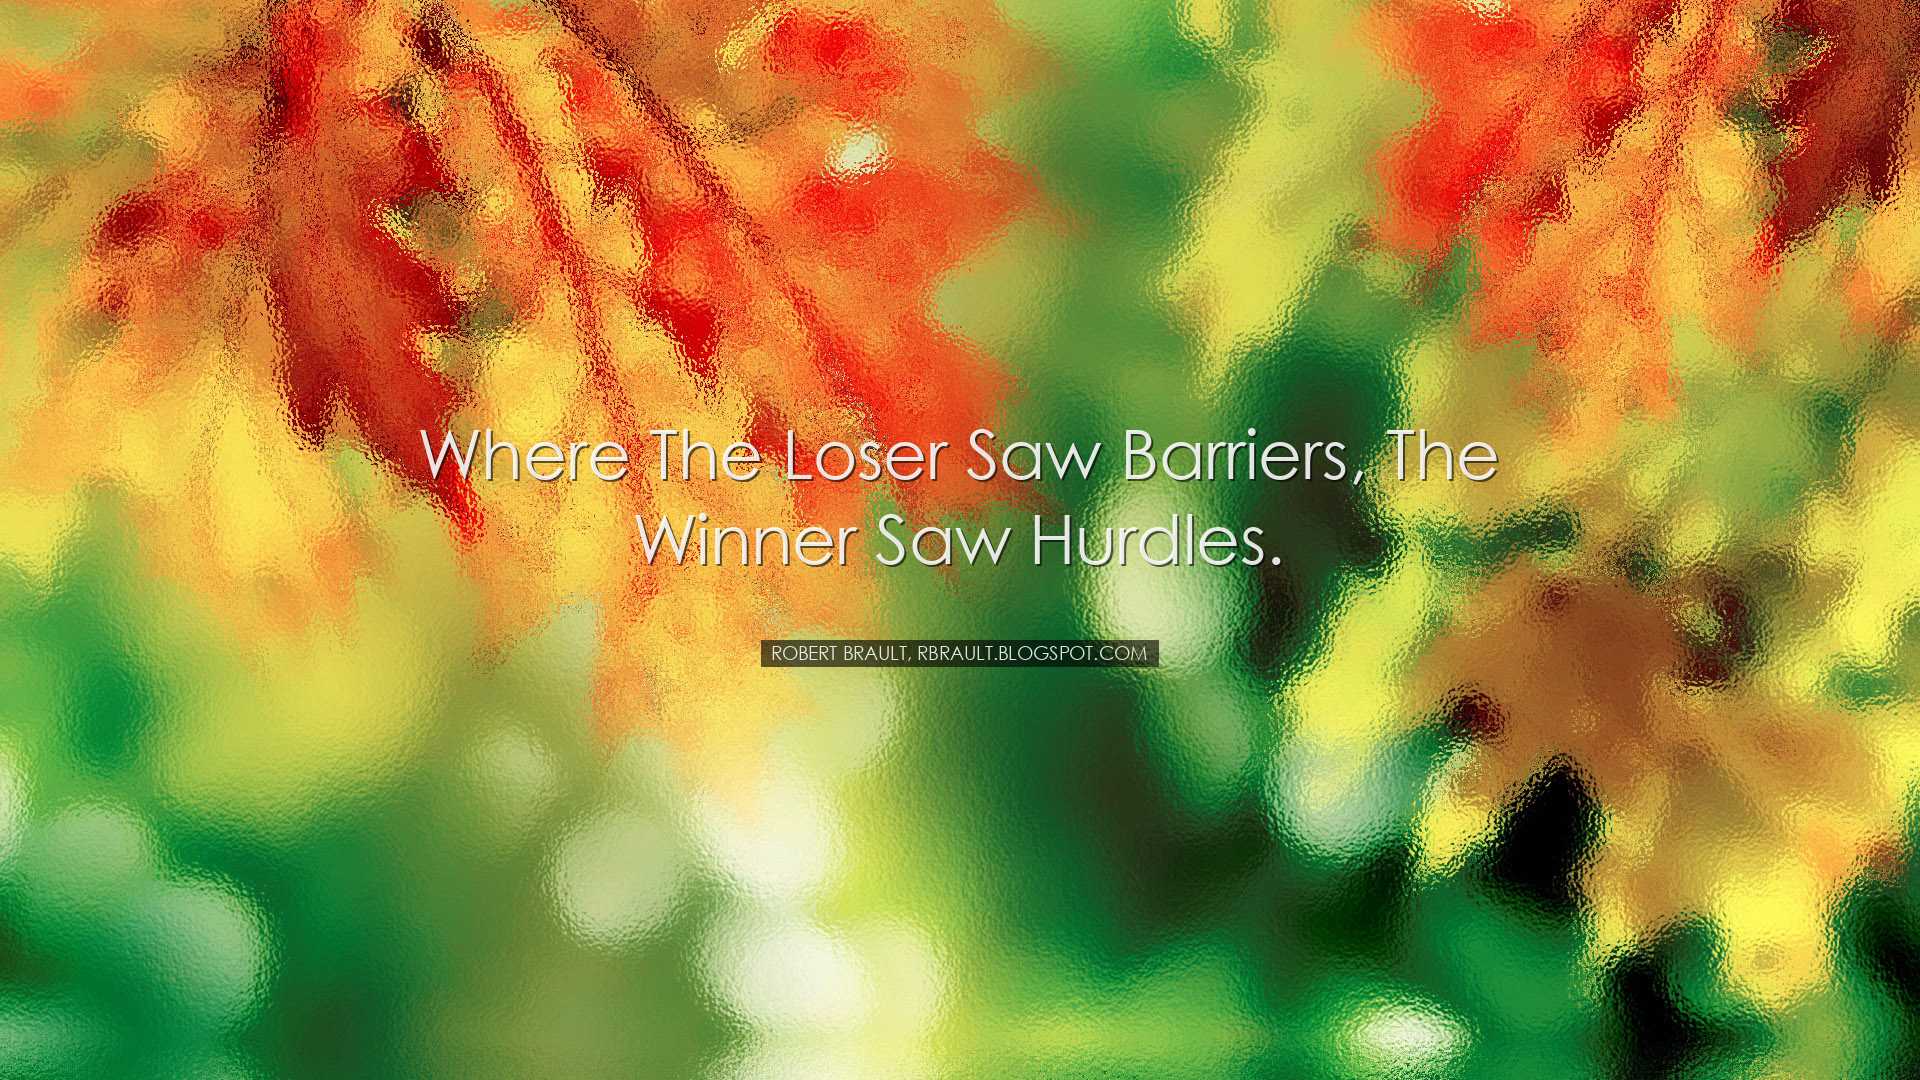 Where the loser saw barriers, the winner saw hurdles. - Robert Bra